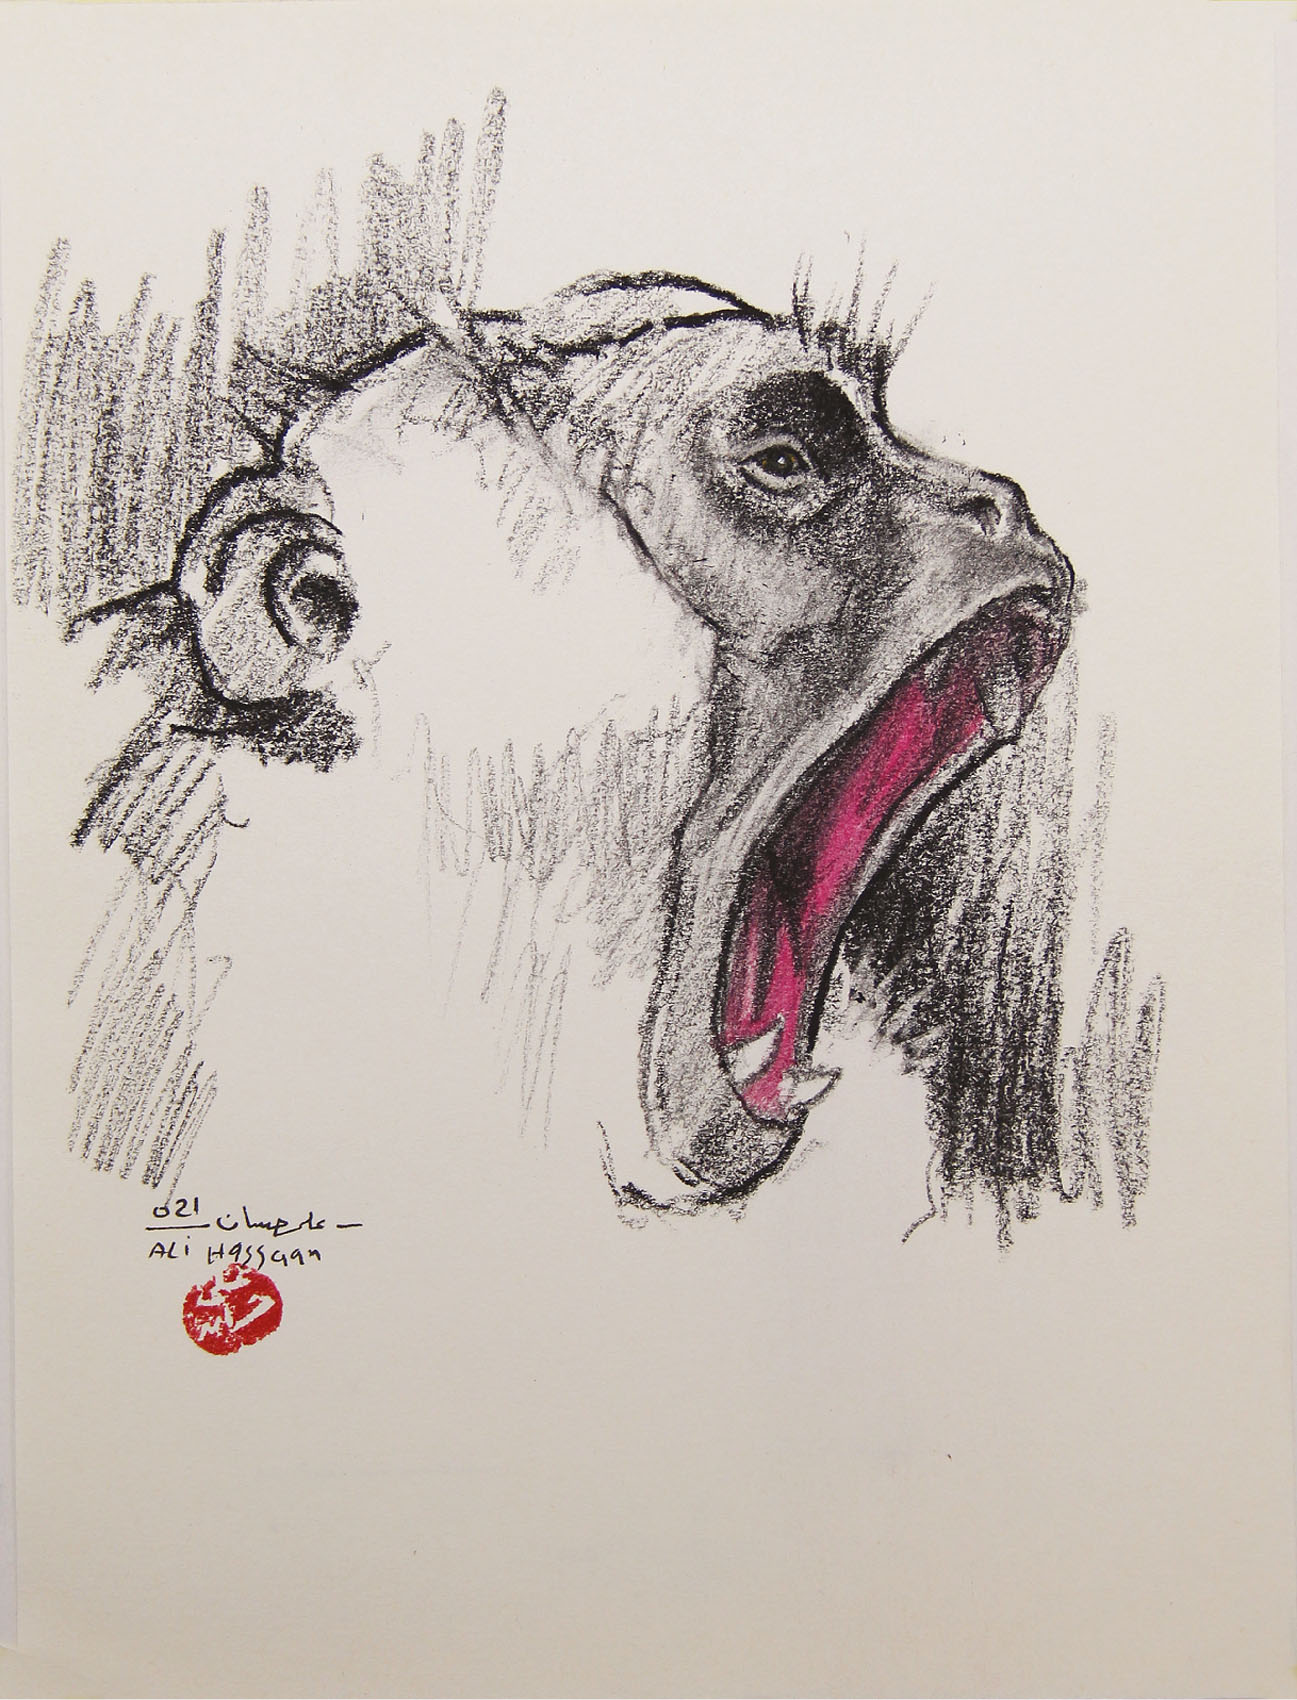 The screaming monkey 1 | 2021 | Charcoal and soft pastel on paper | 21 cm x 28 cm